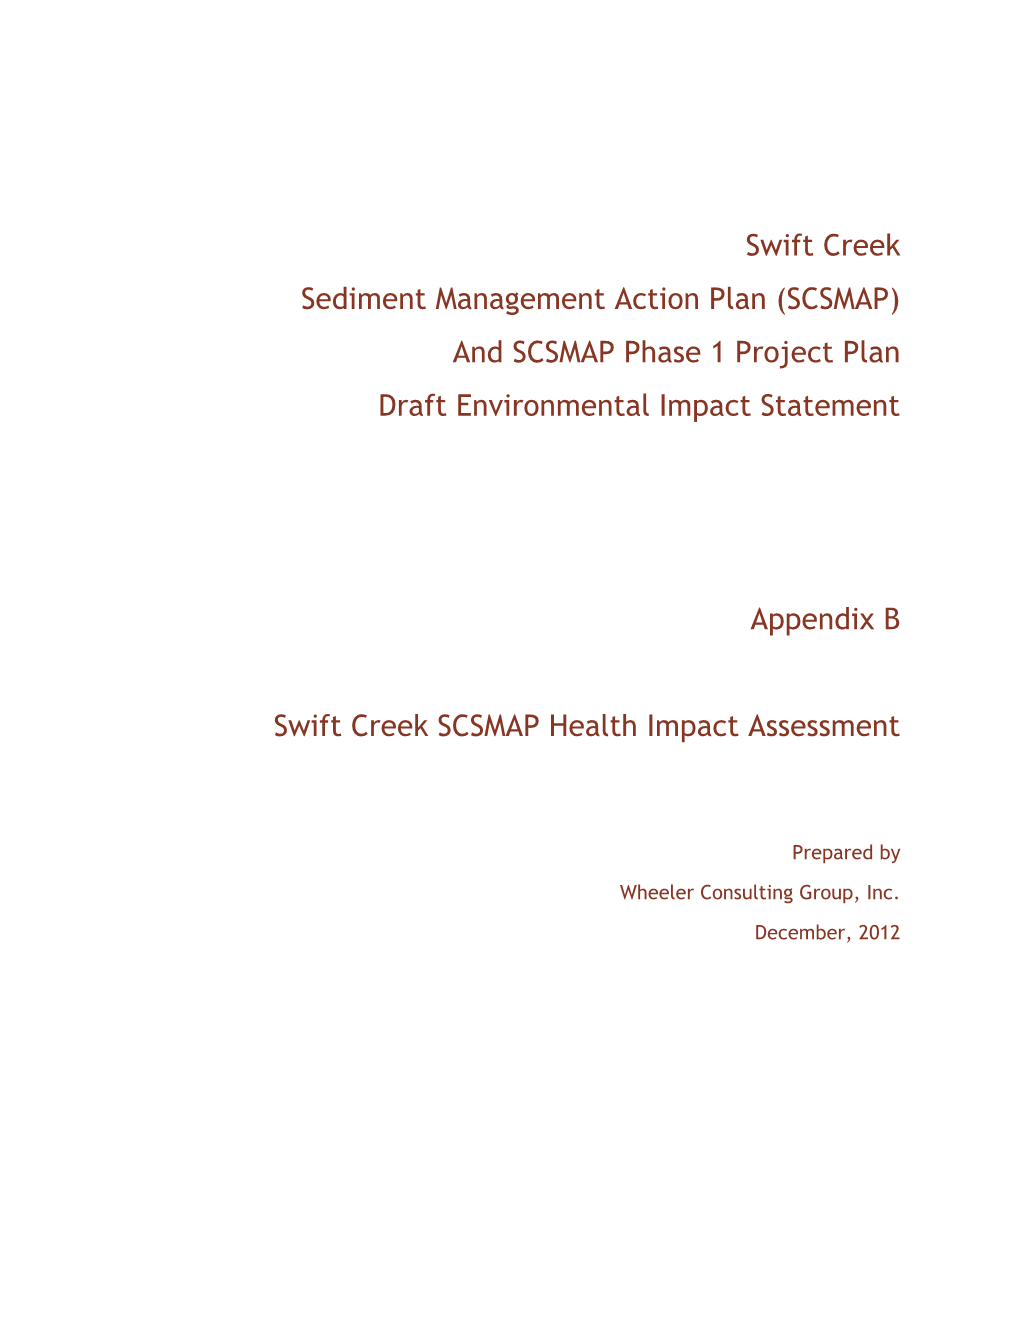 Swift Creek Sediment Management Action Plan (SCSMAP) and SCSMAP Phase 1 Project Plan Draft Environmental Impact Statement